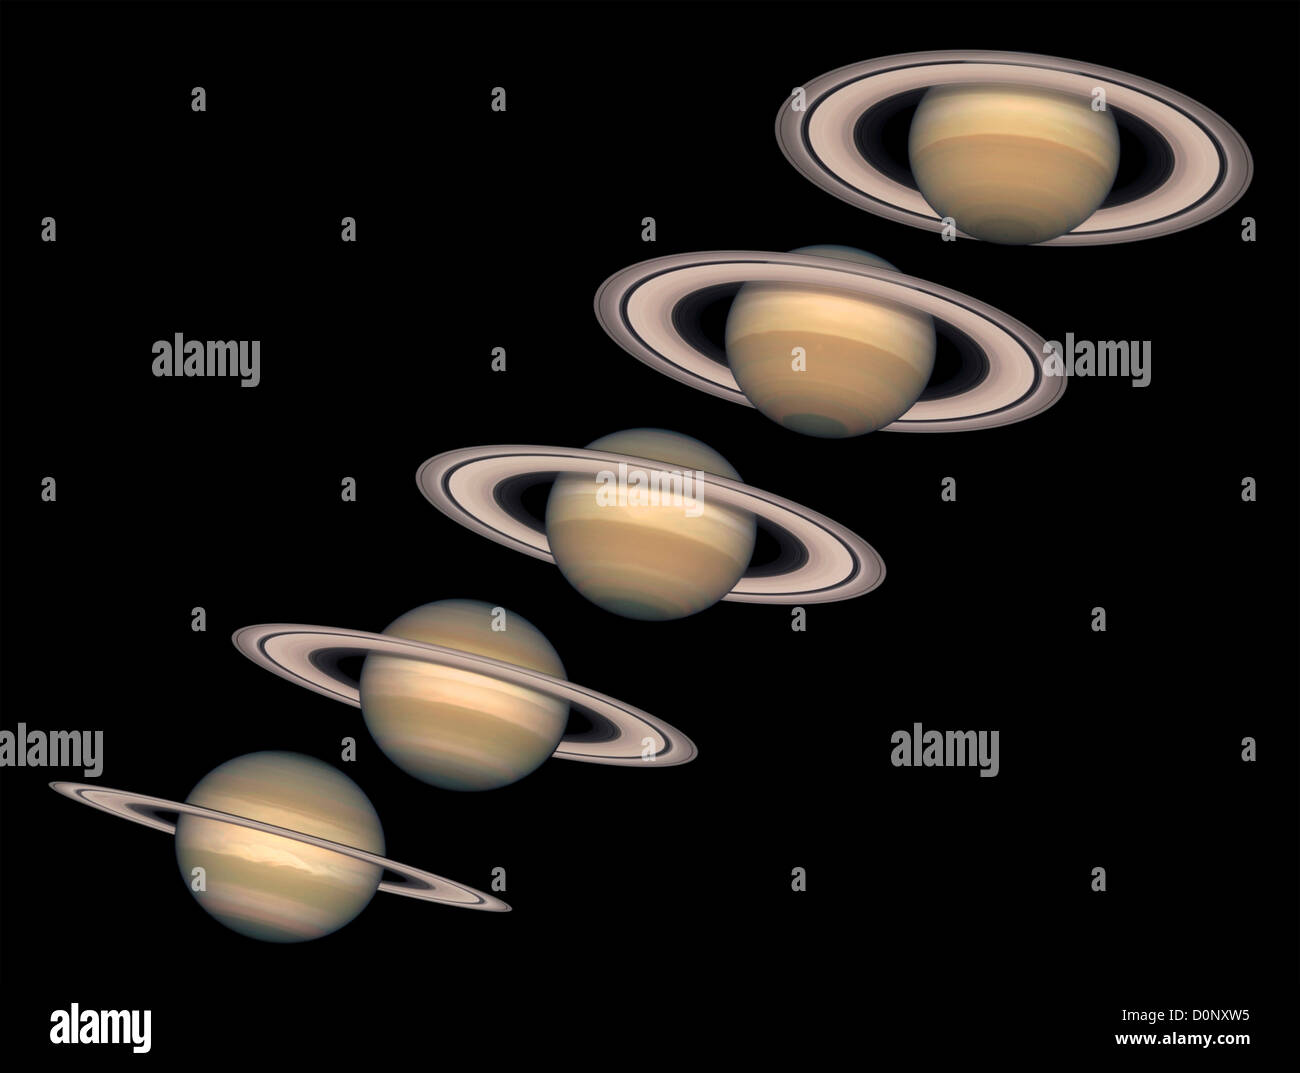 A Change of Seasons on Saturn, as Seen by Hubble Space Telecope Stock Photo